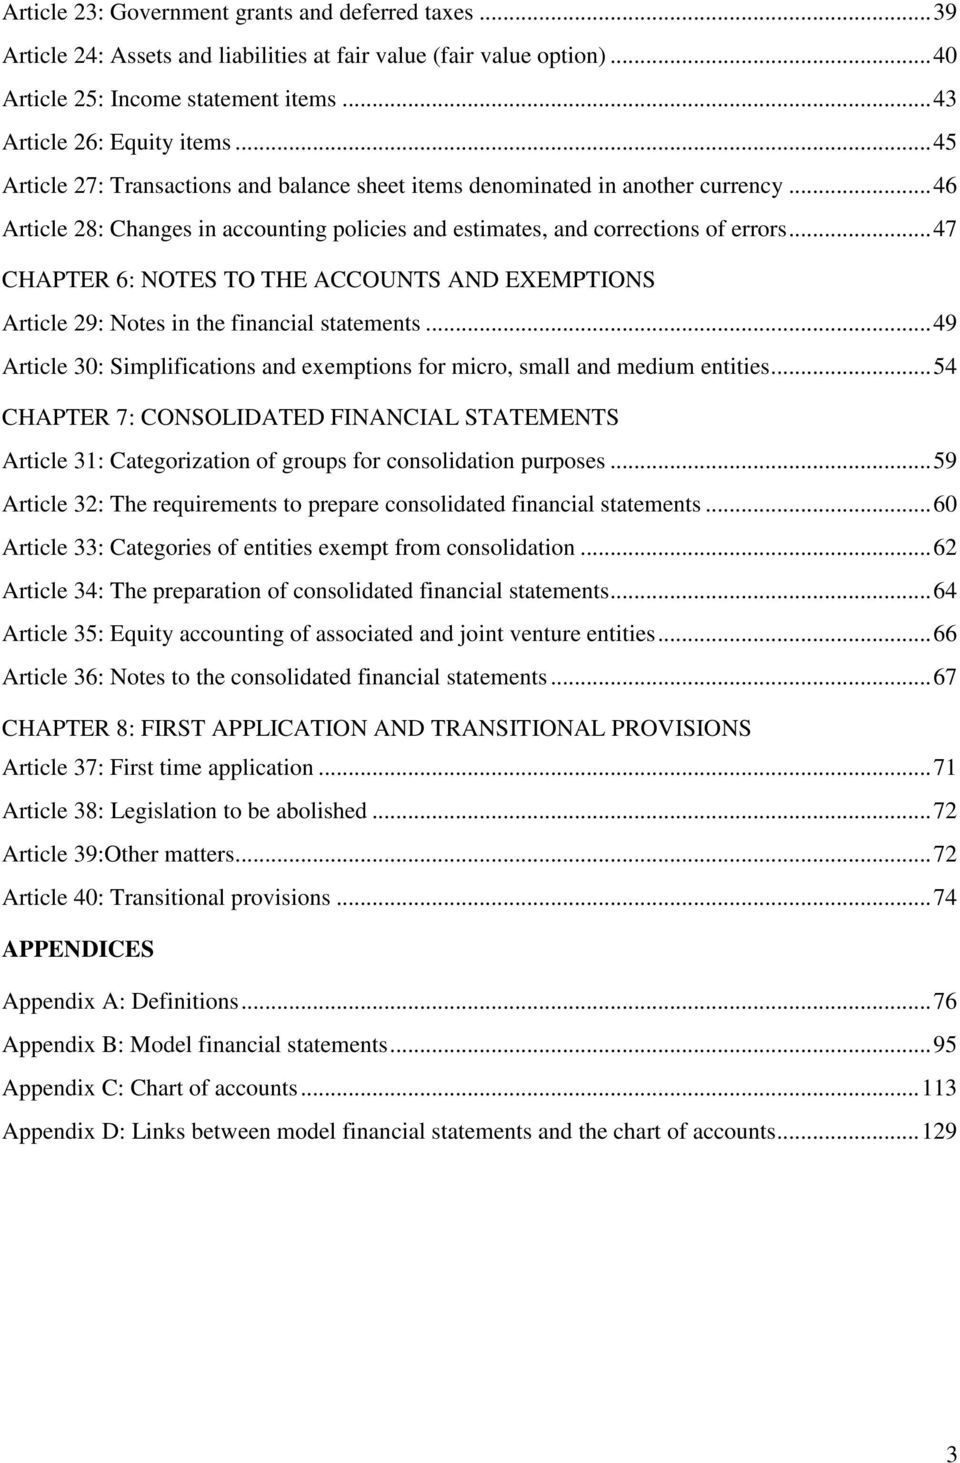 .. 47 CHAPTER 6: NOTES TO THE ACCOUNTS AND EXEMPTIONS Article 29: Notes in the financial statements... 49 Article 30: Simplifications and exemptions for micro, small and medium entities.